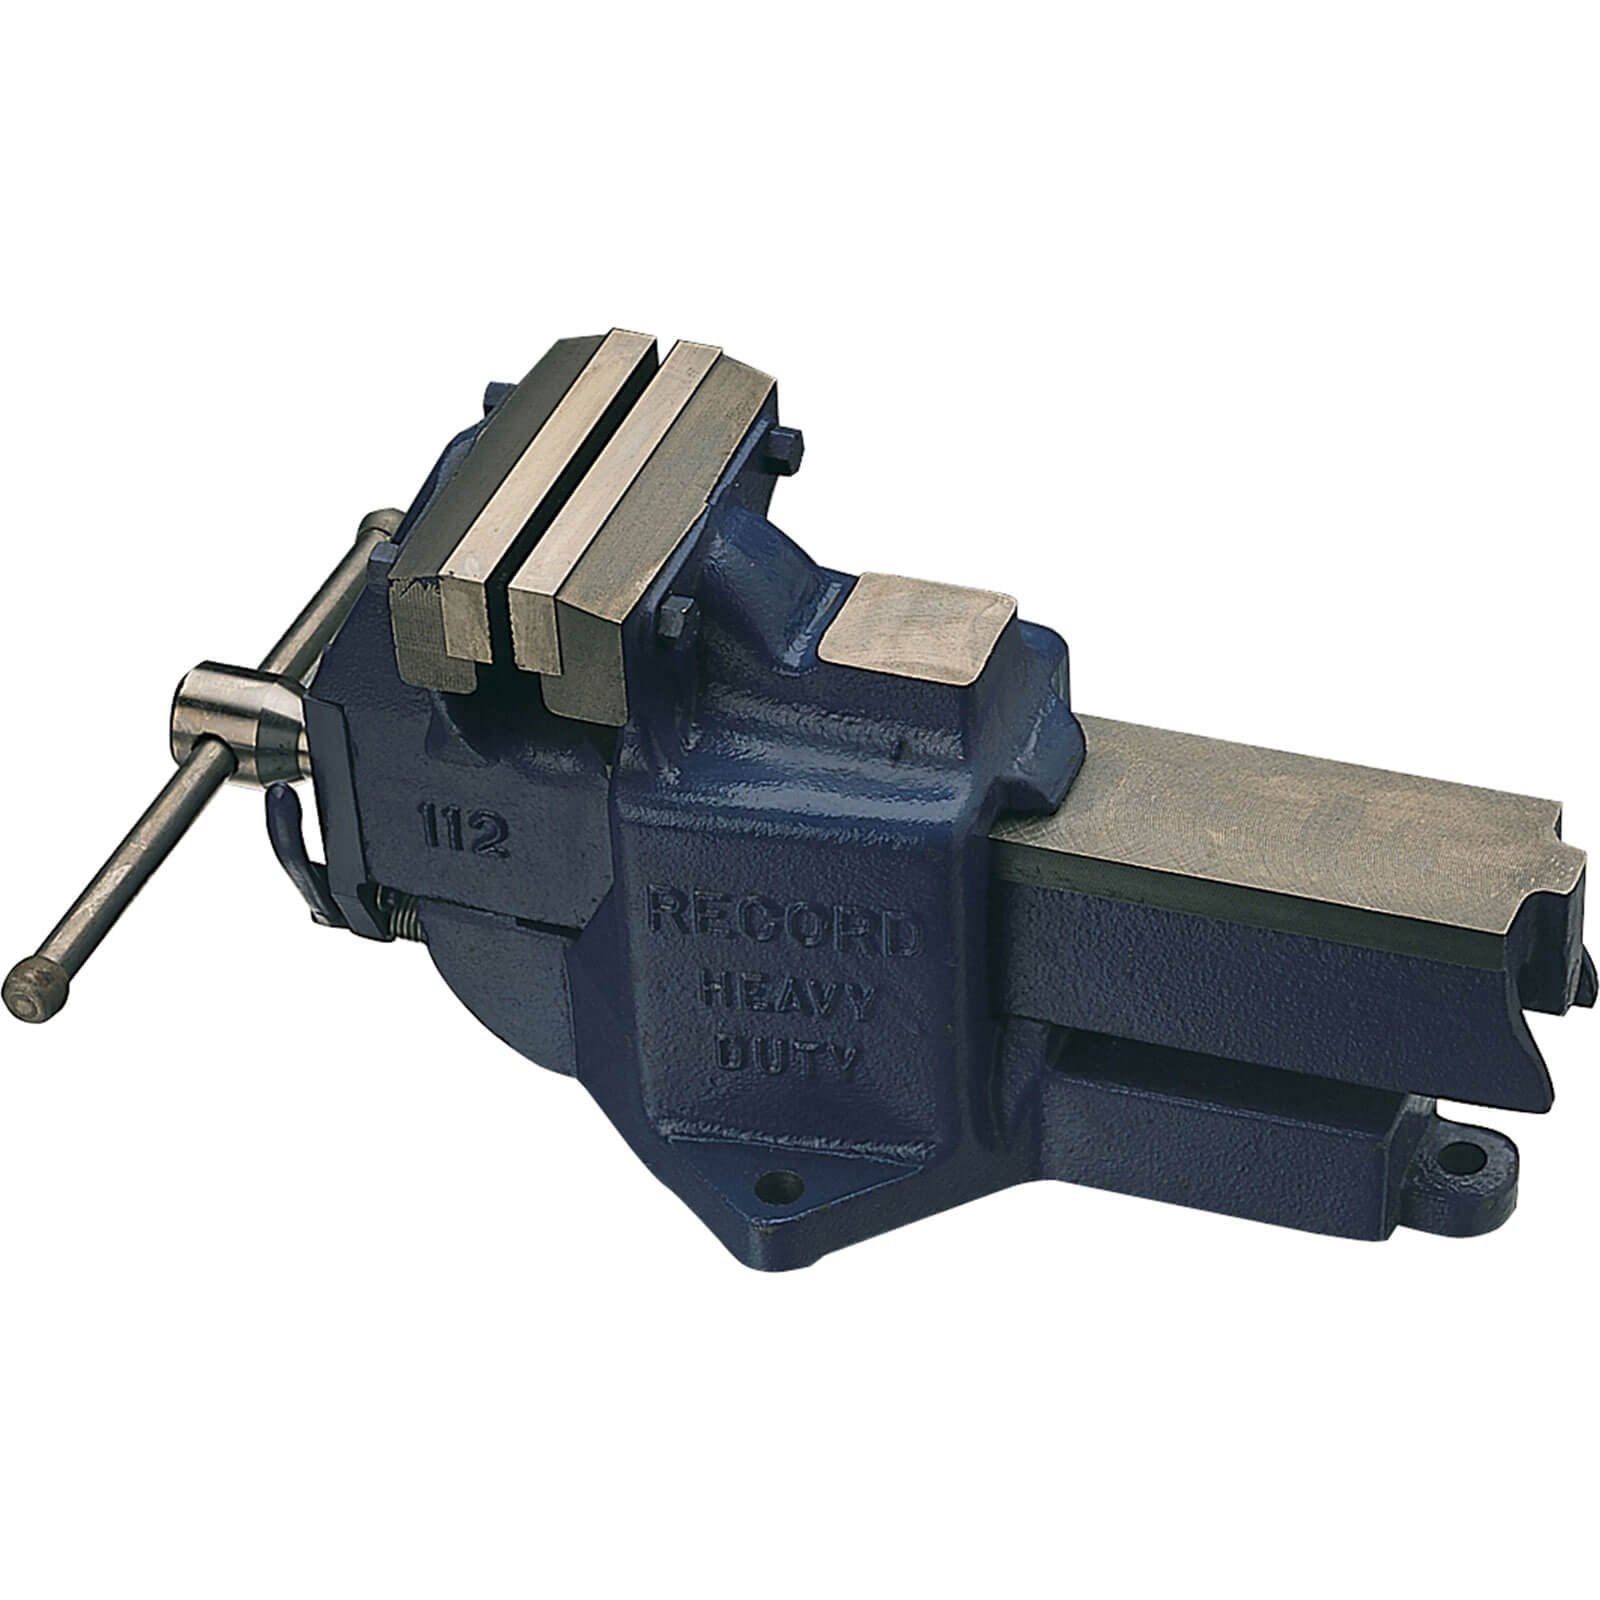 Image of Record Engineers Heavy Duty Quick Release Vice 150mm